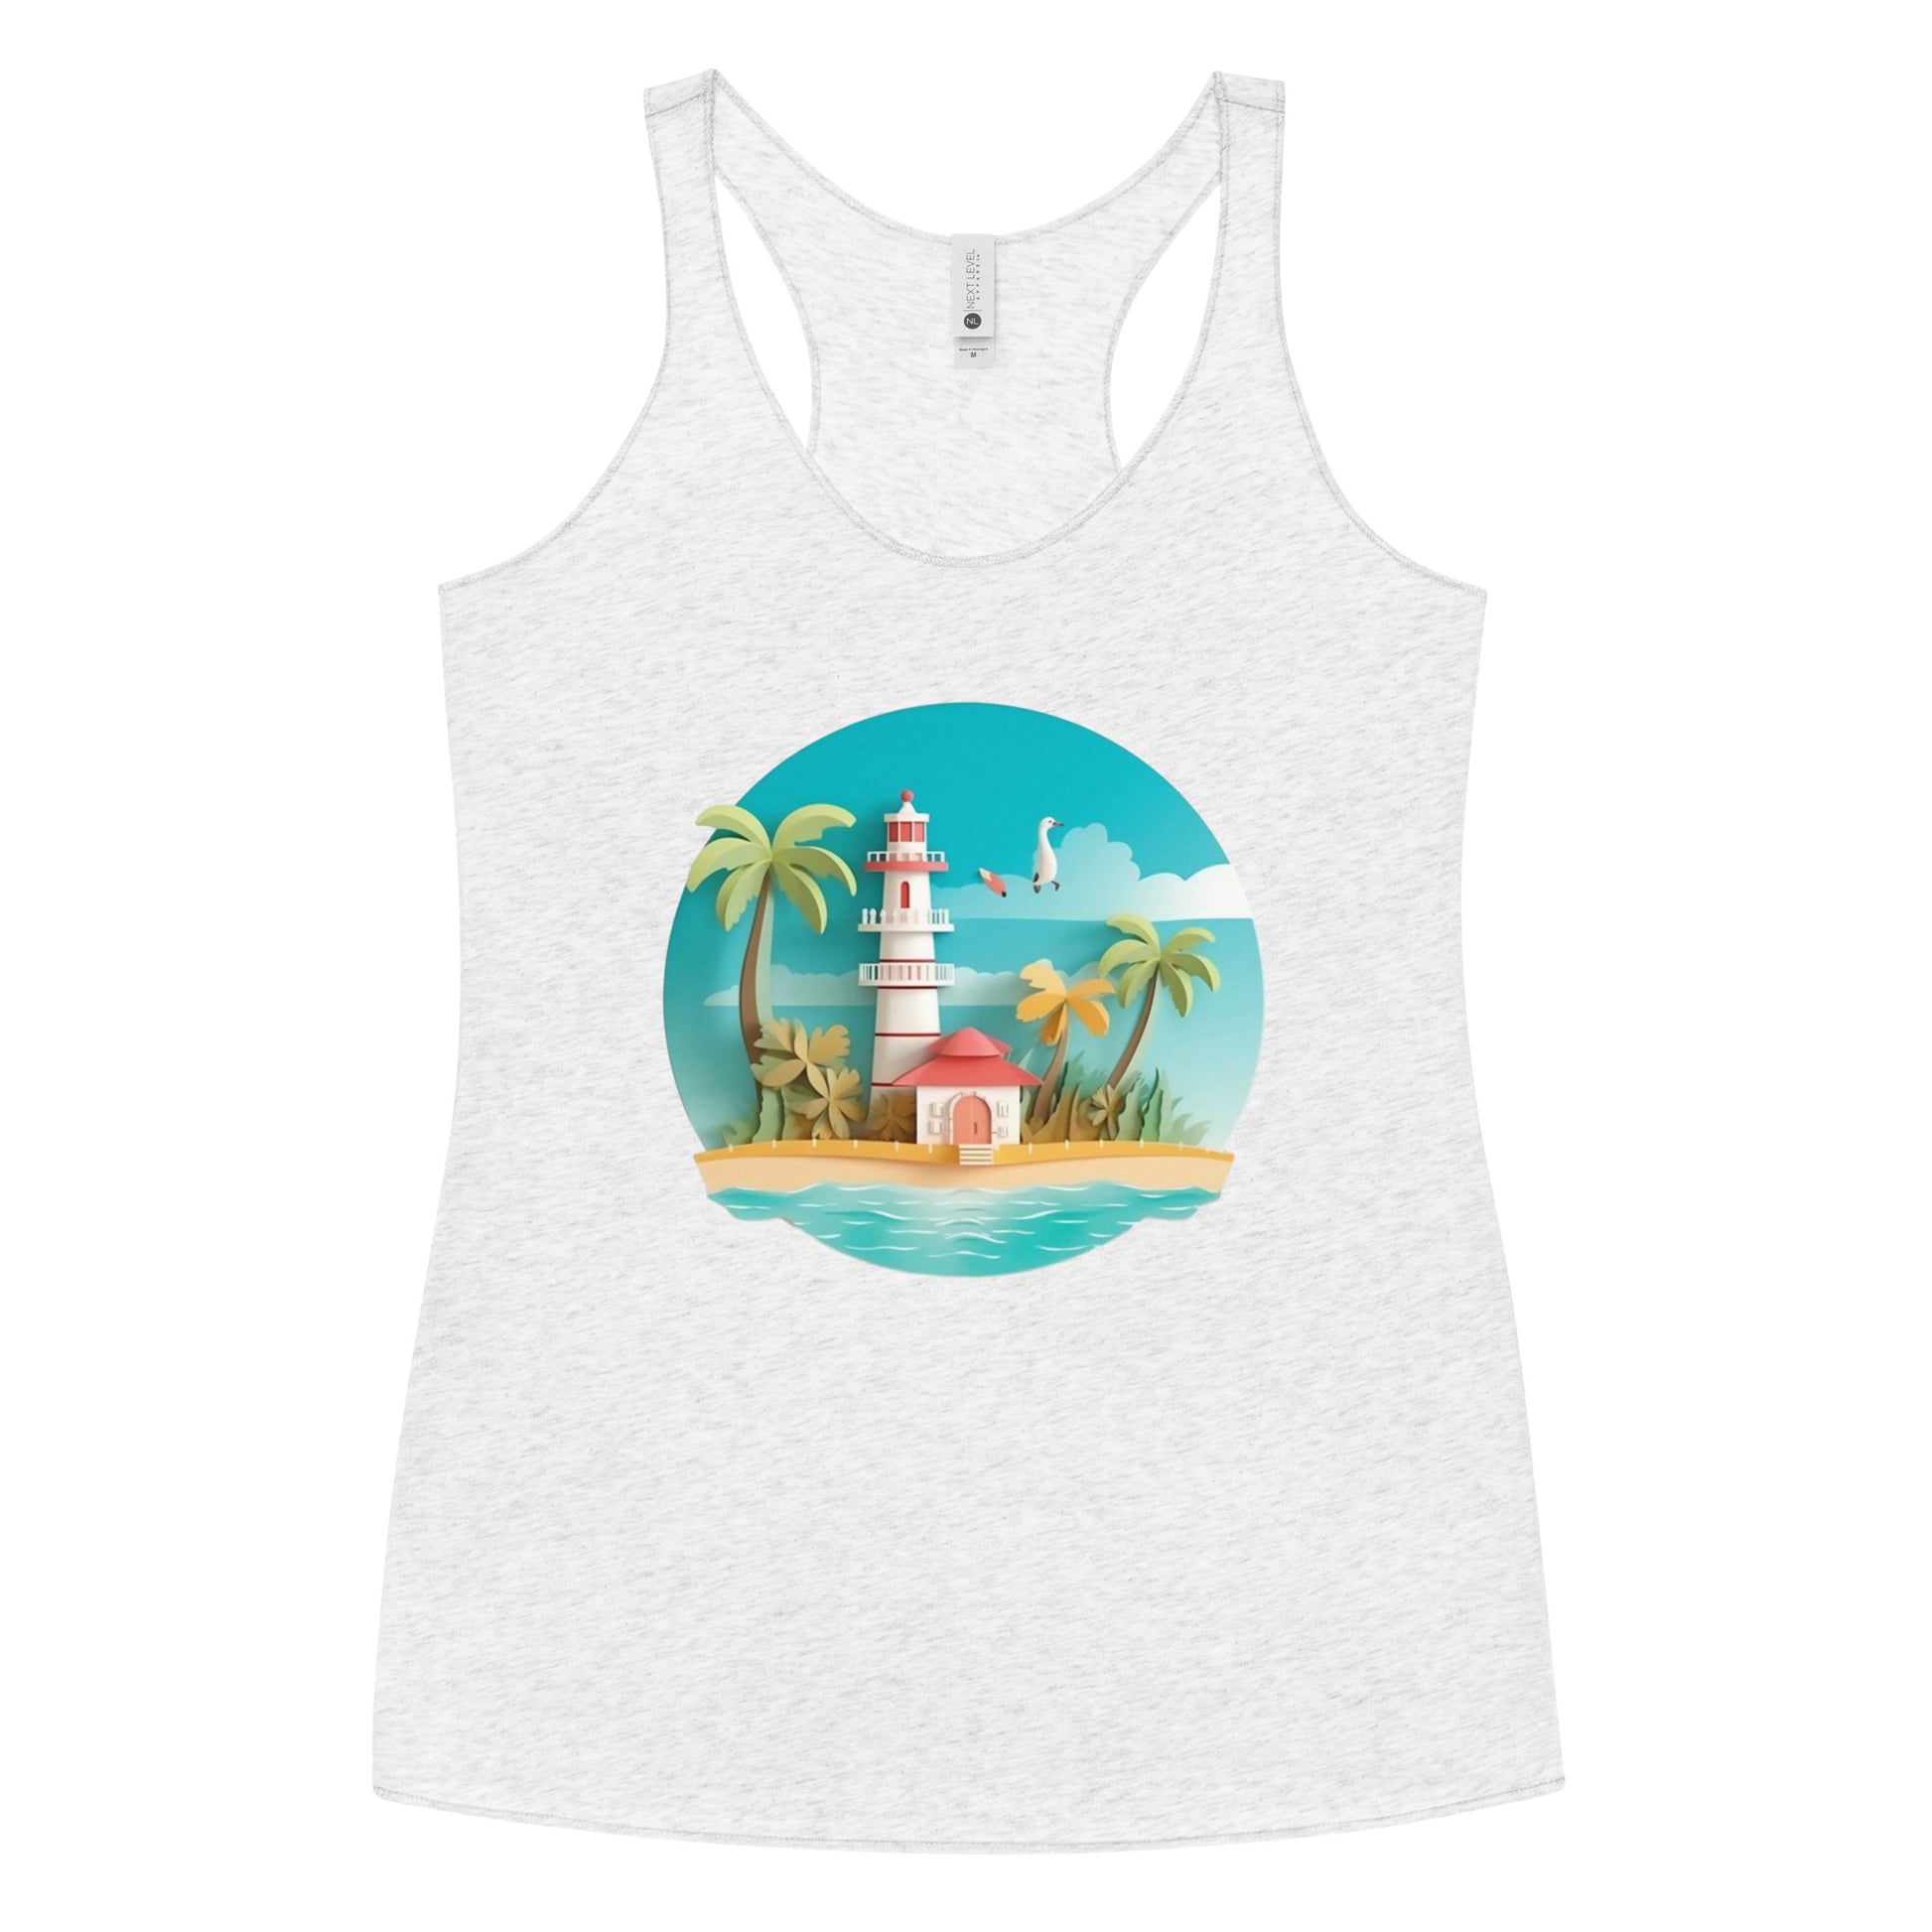 White tank top with picture of lighthouse and palm trees